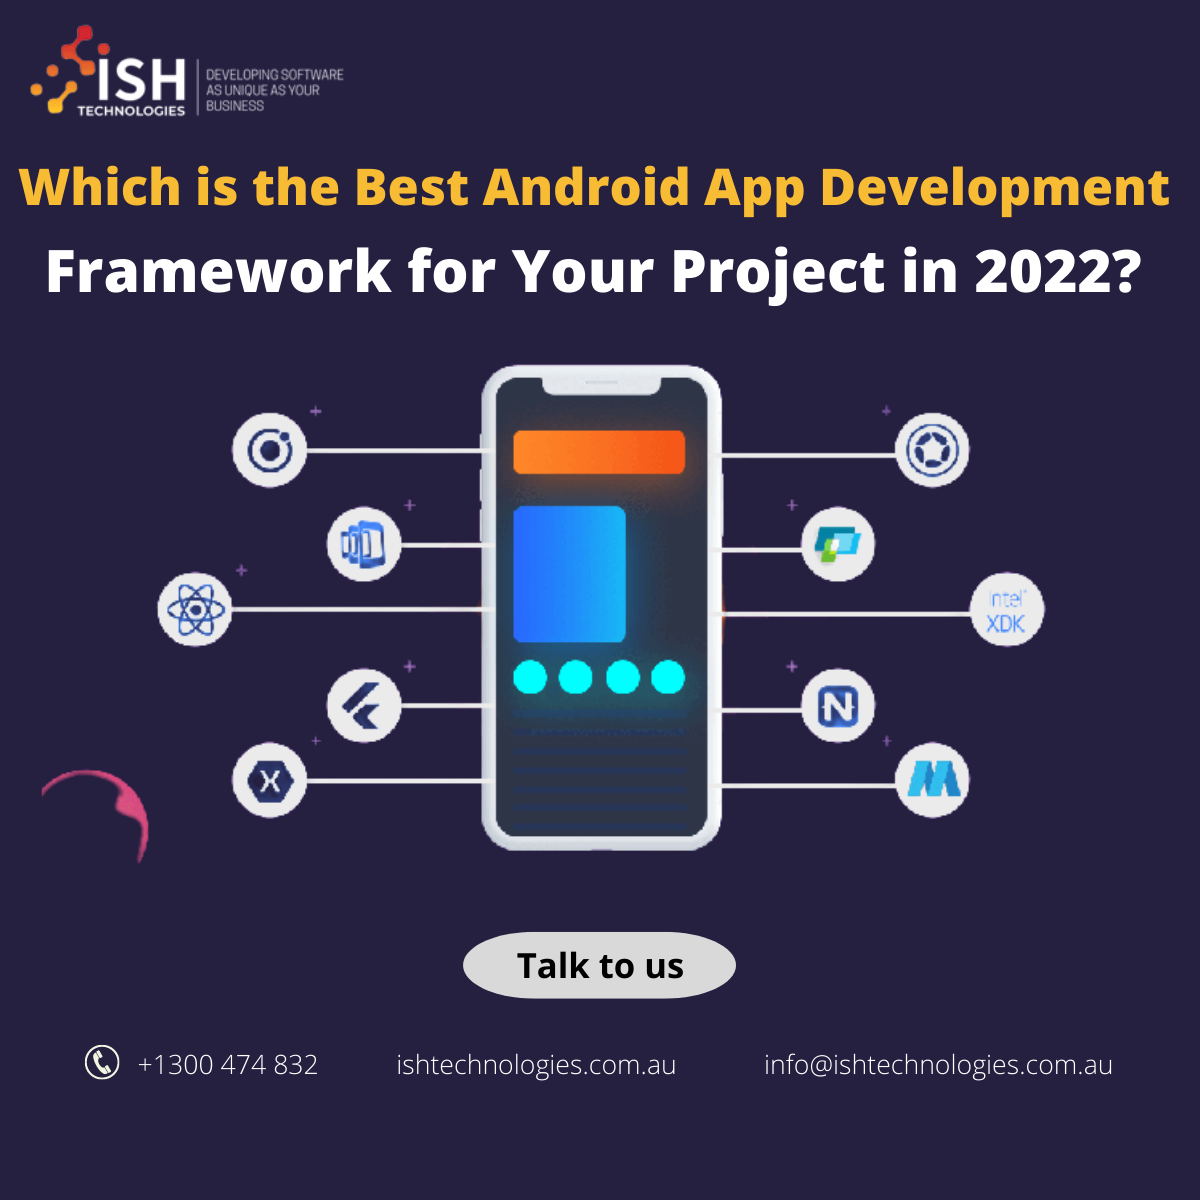 Which-is-the-best-android-app-development-framework-for-your-project-in-2022